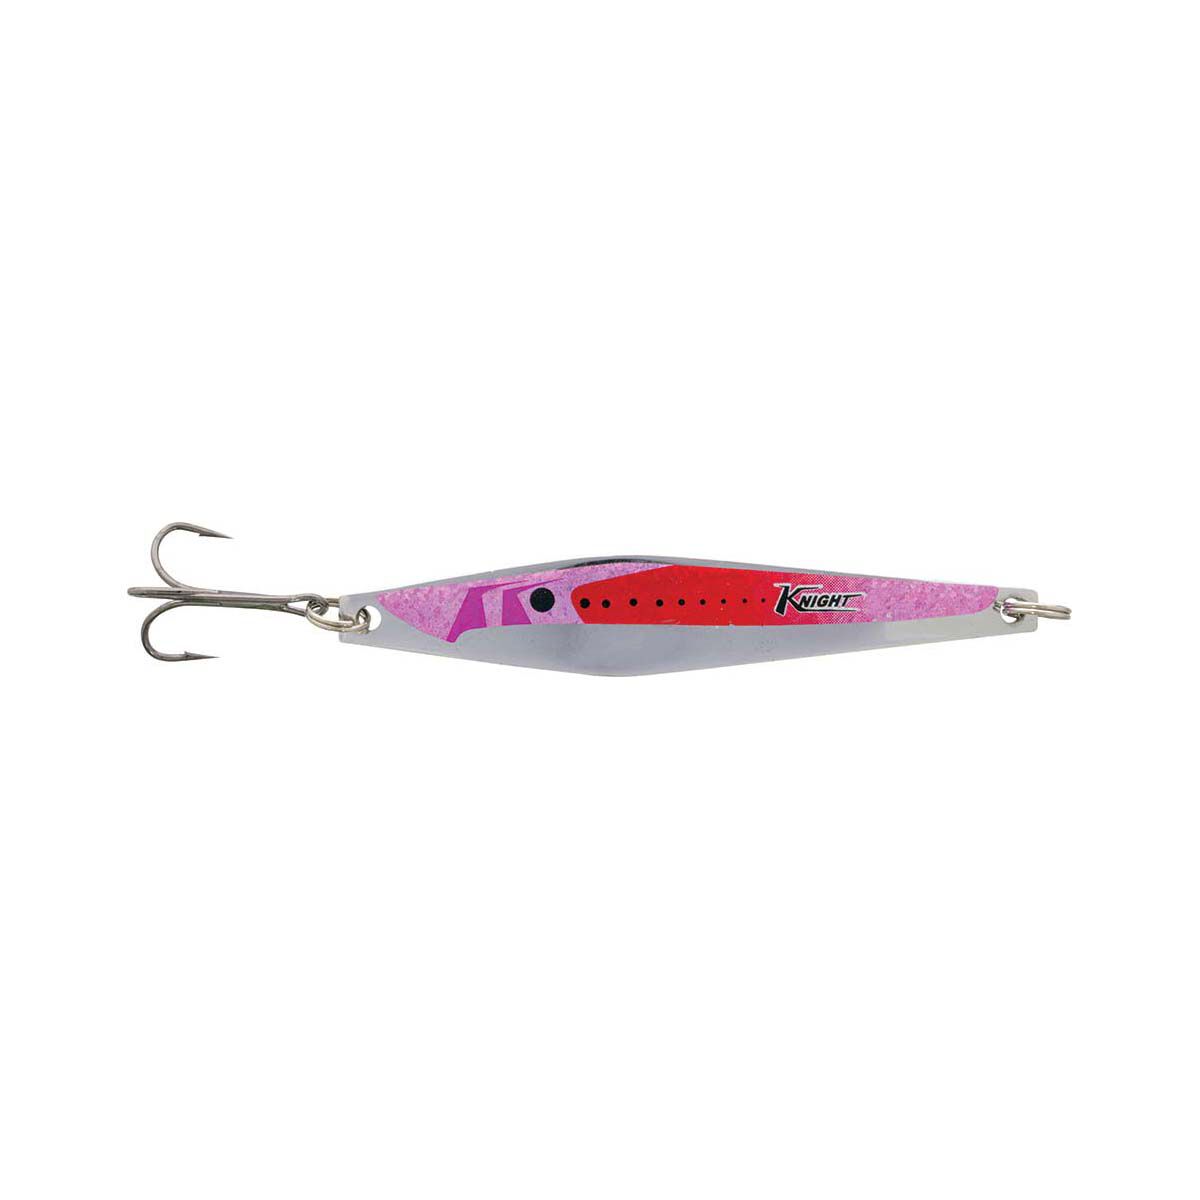 Surecatch Knight Metal Lure 65g Yellow Red